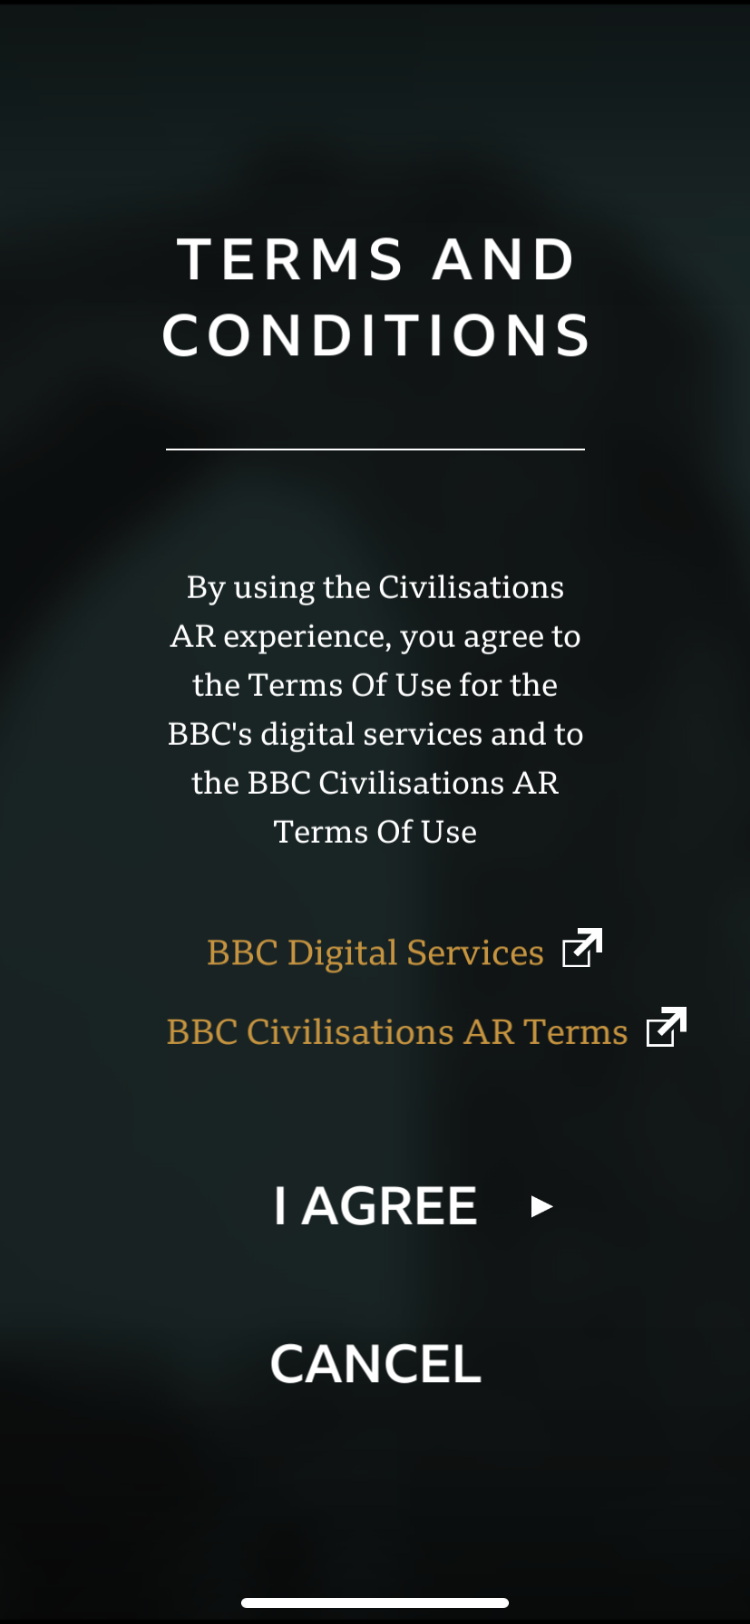 Civilisations AR introductory page.